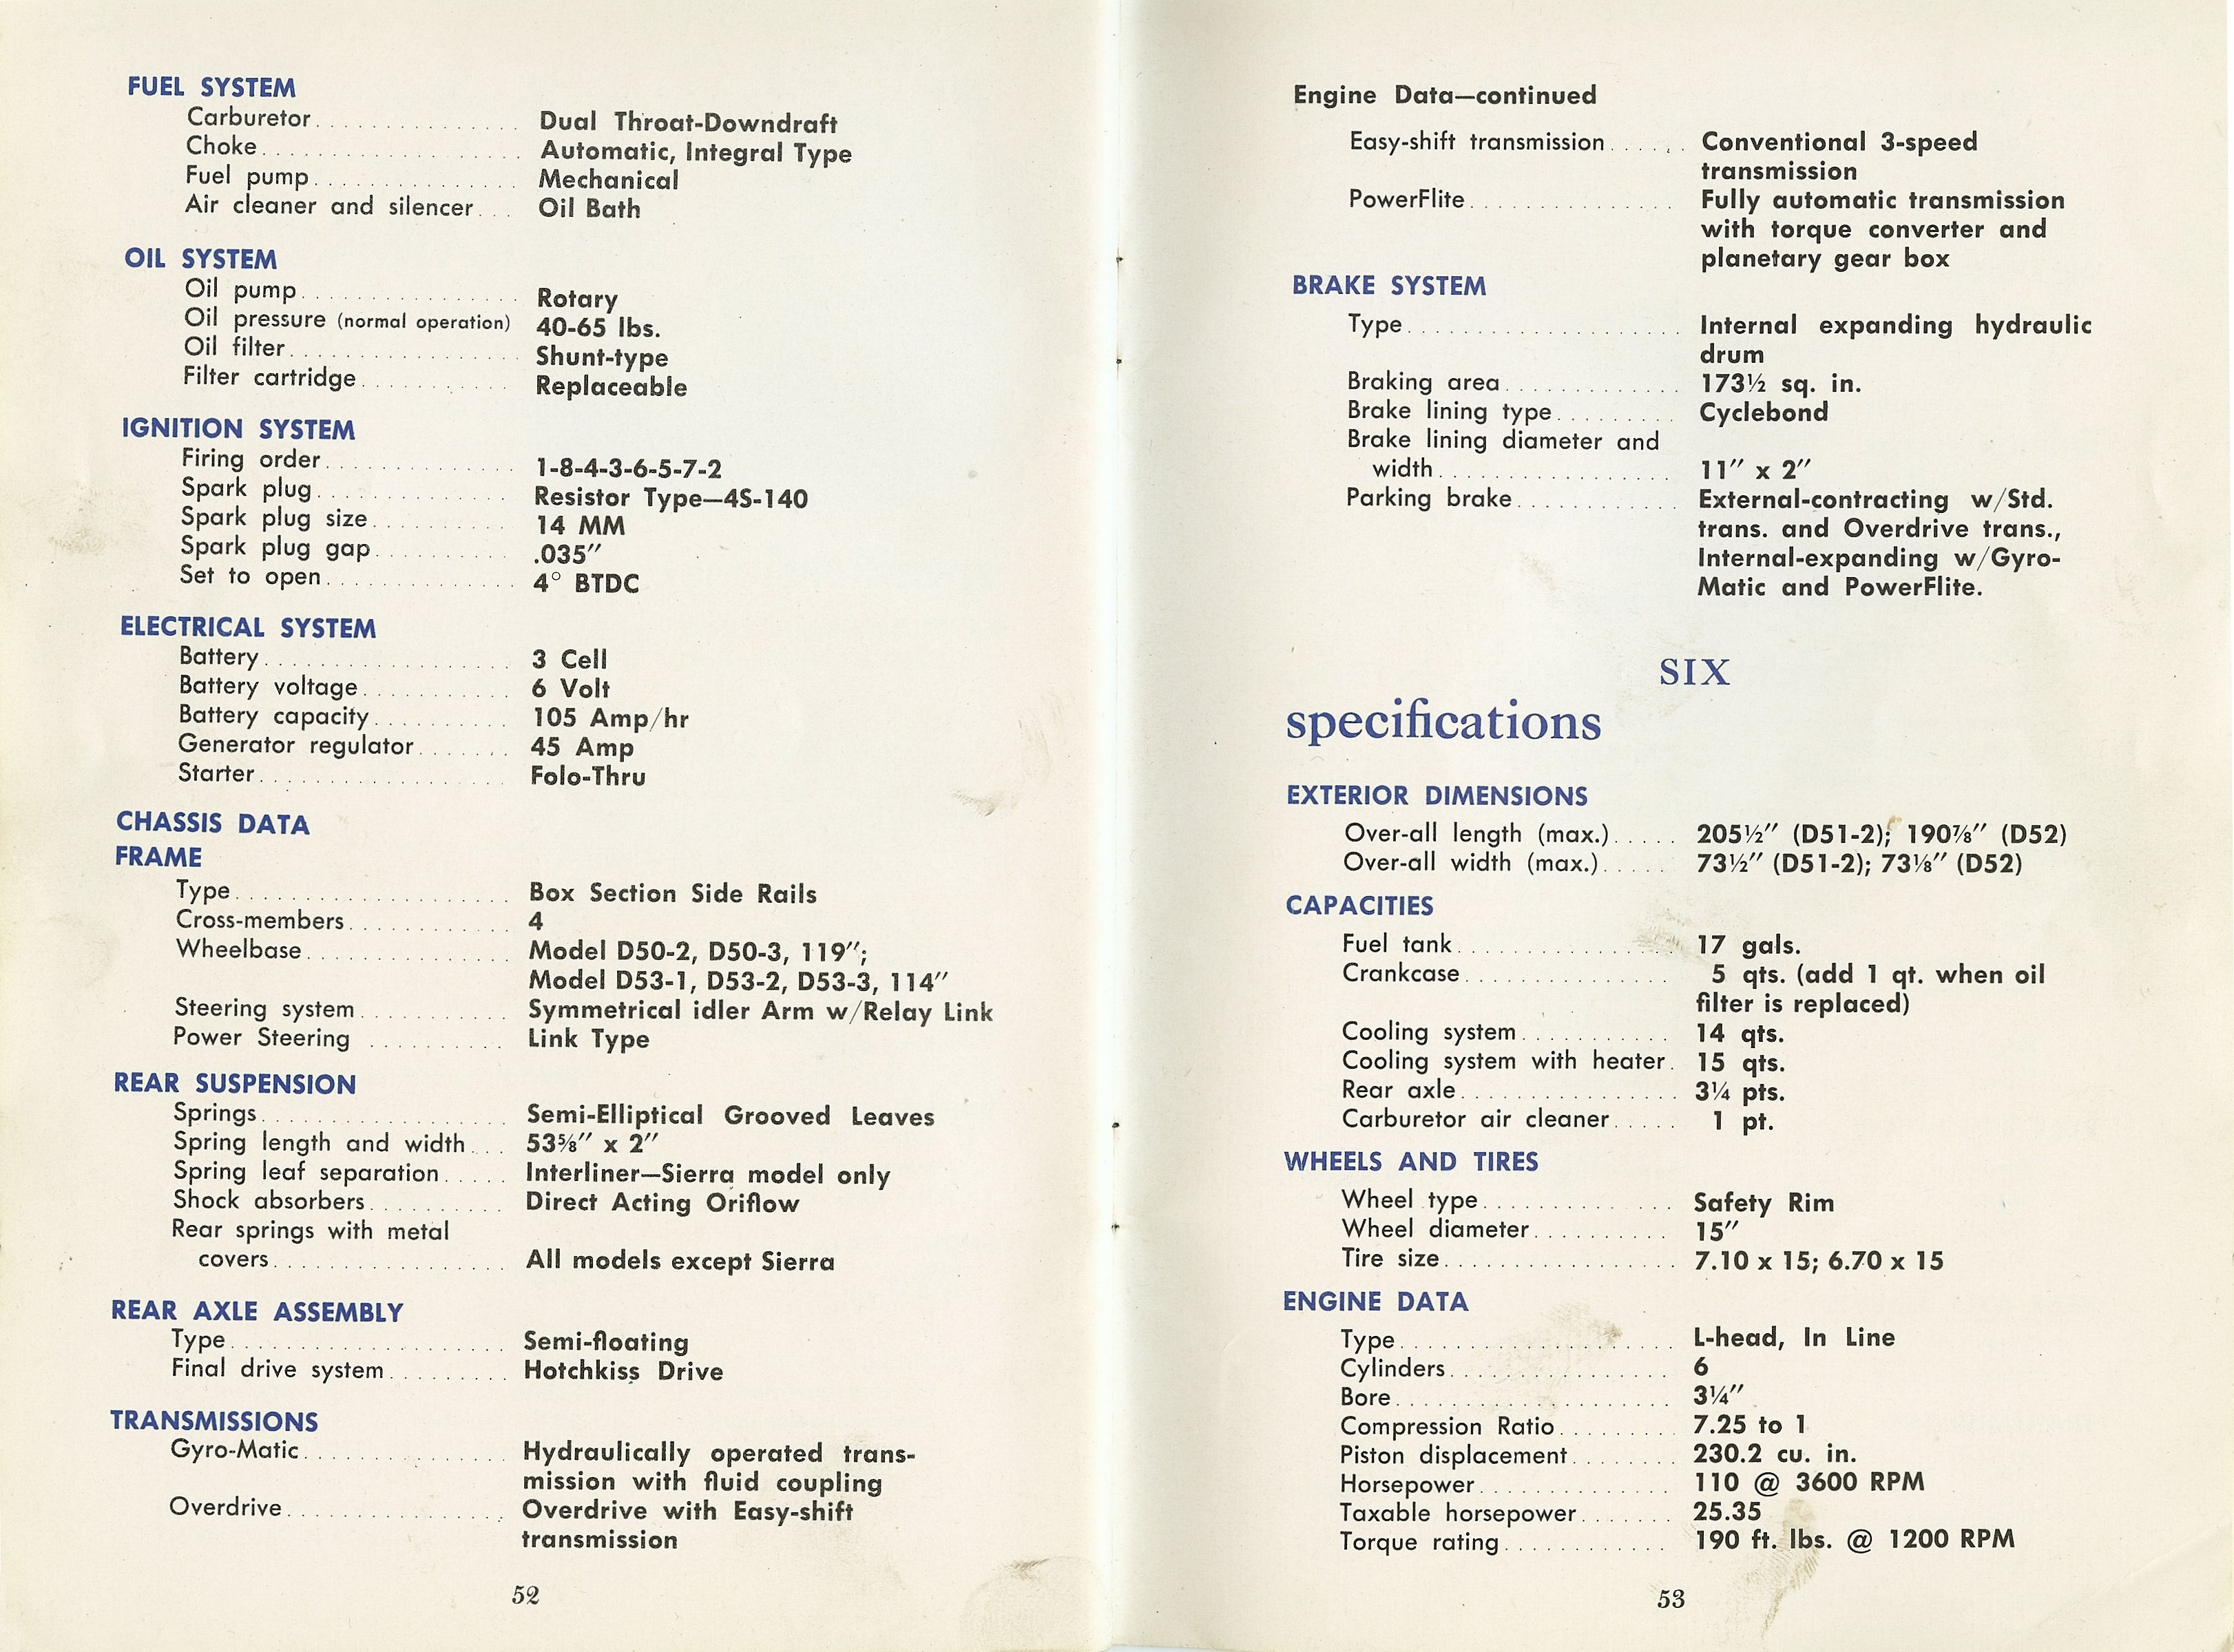 1954 Dodge Owners Manual-52-53